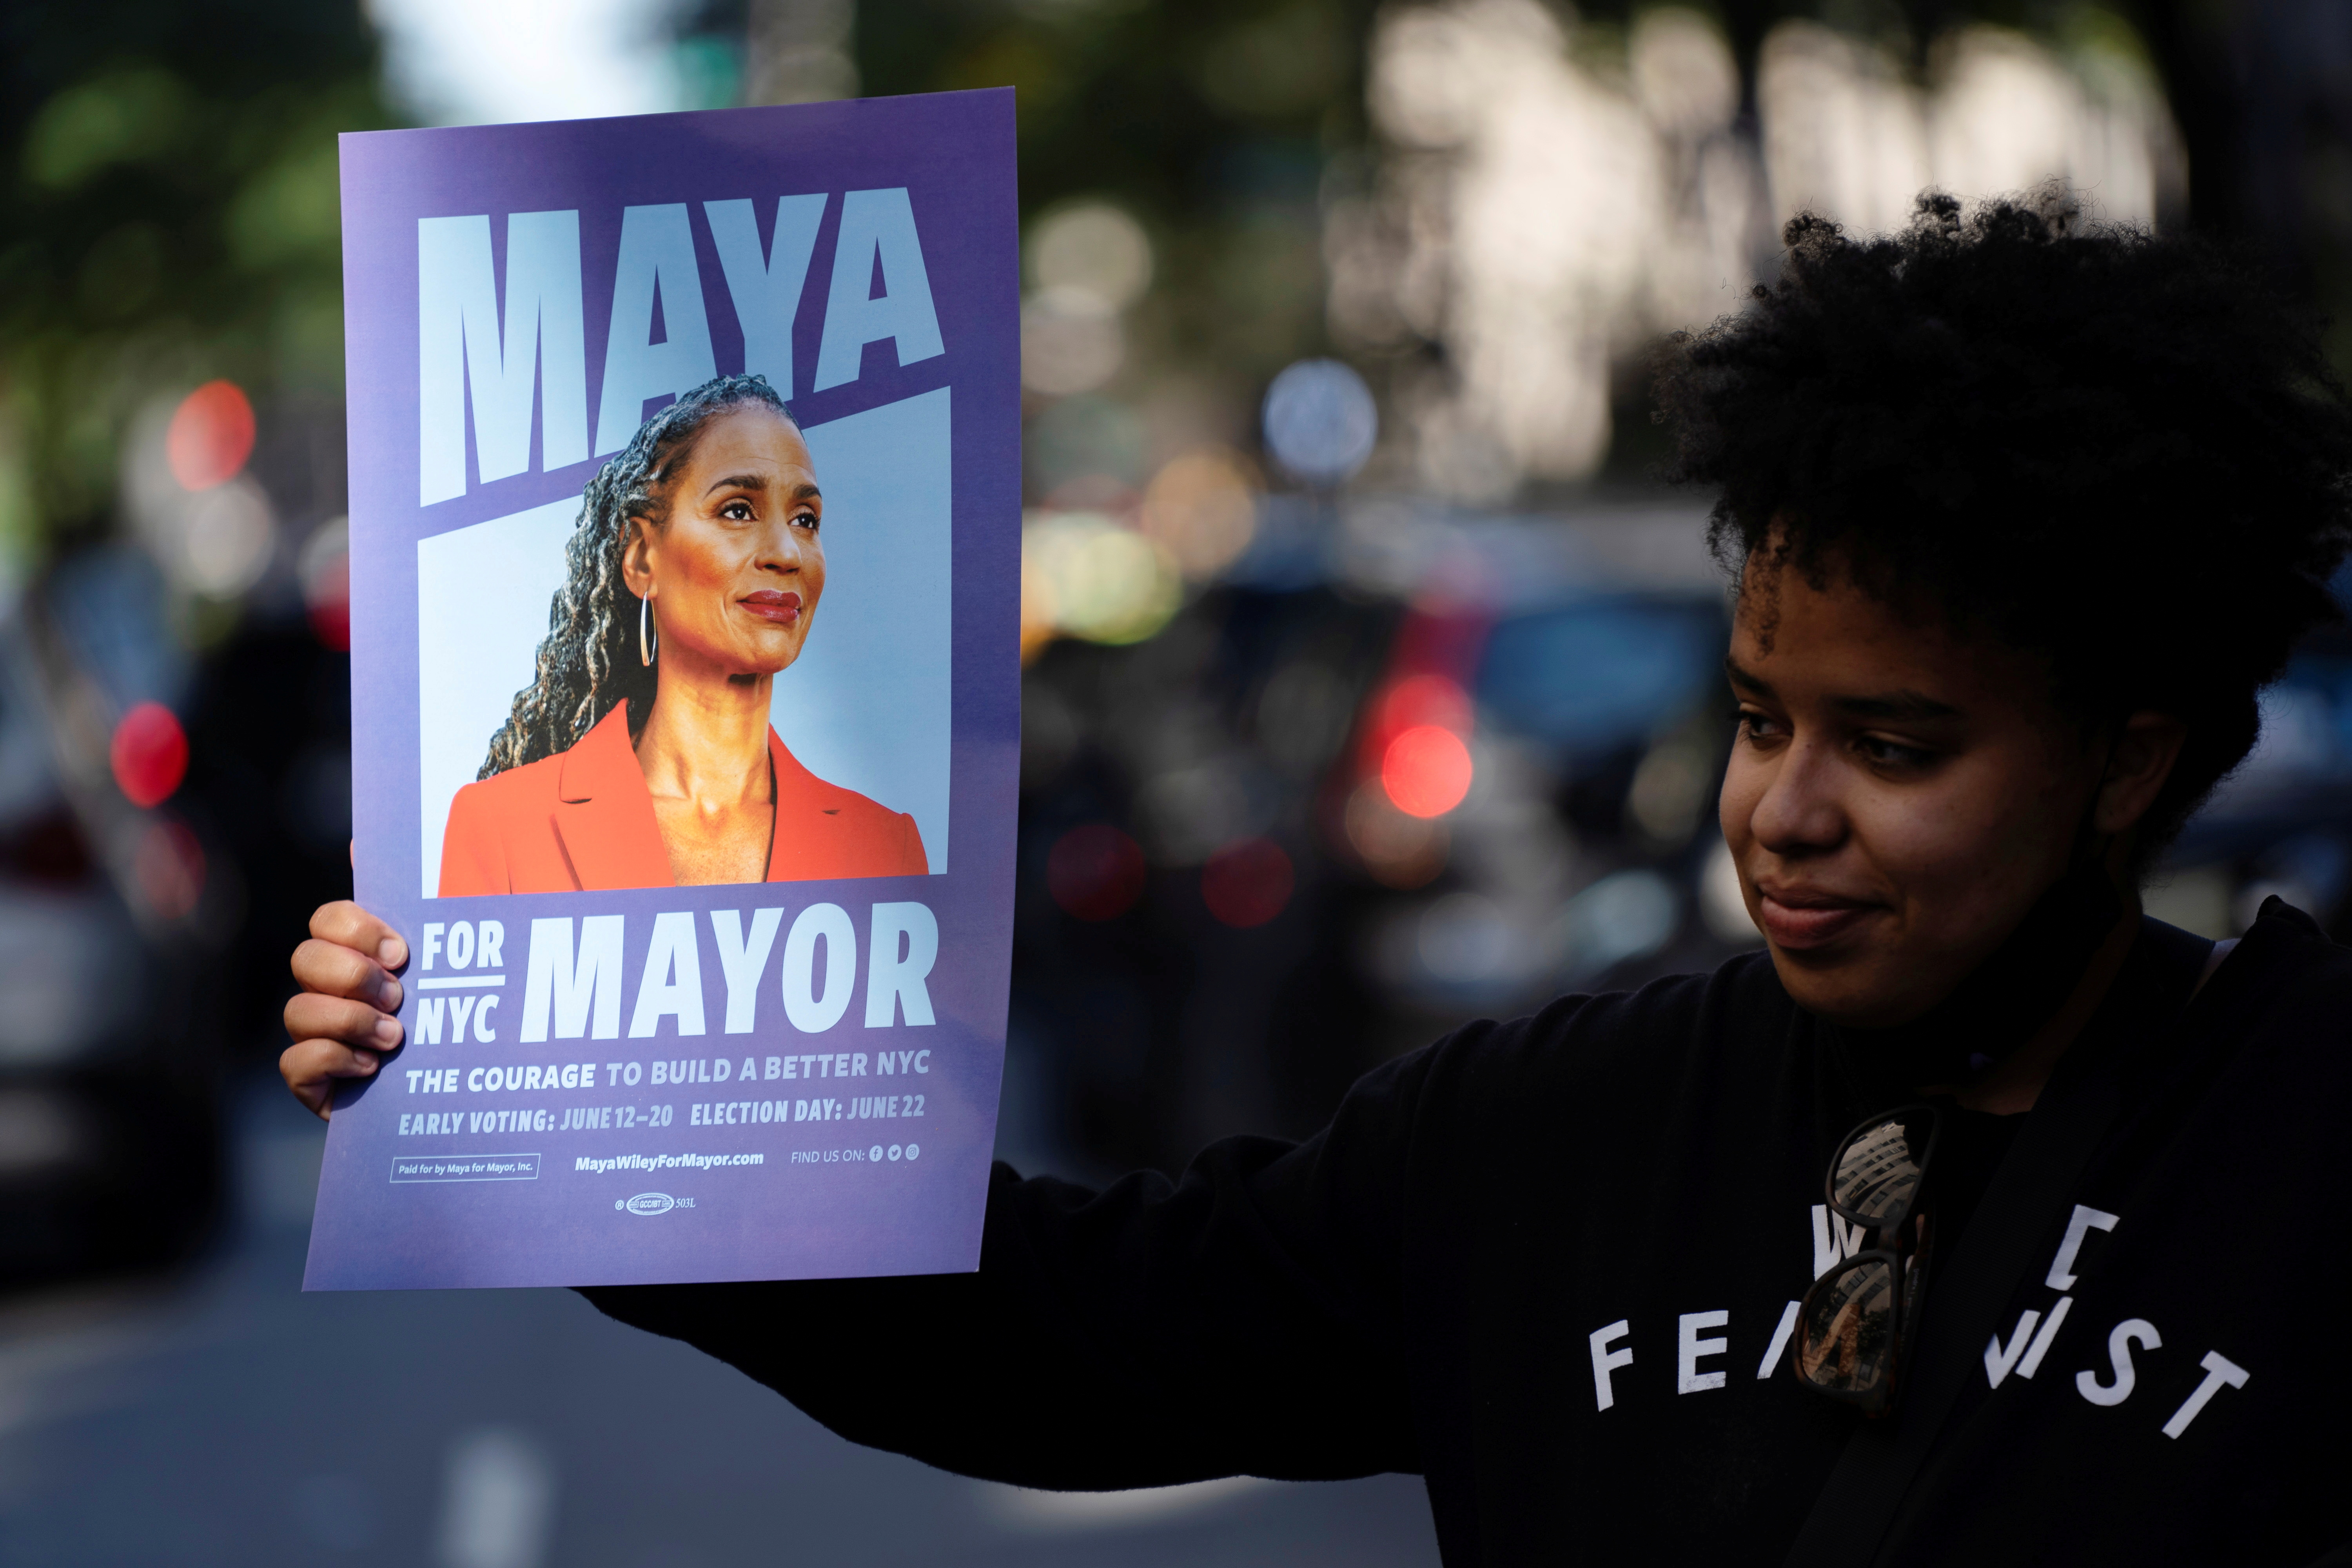 A supporter holds a sign for New York City Mayoral hopeful Maya Wiley at the Democratic primary debate in New York City